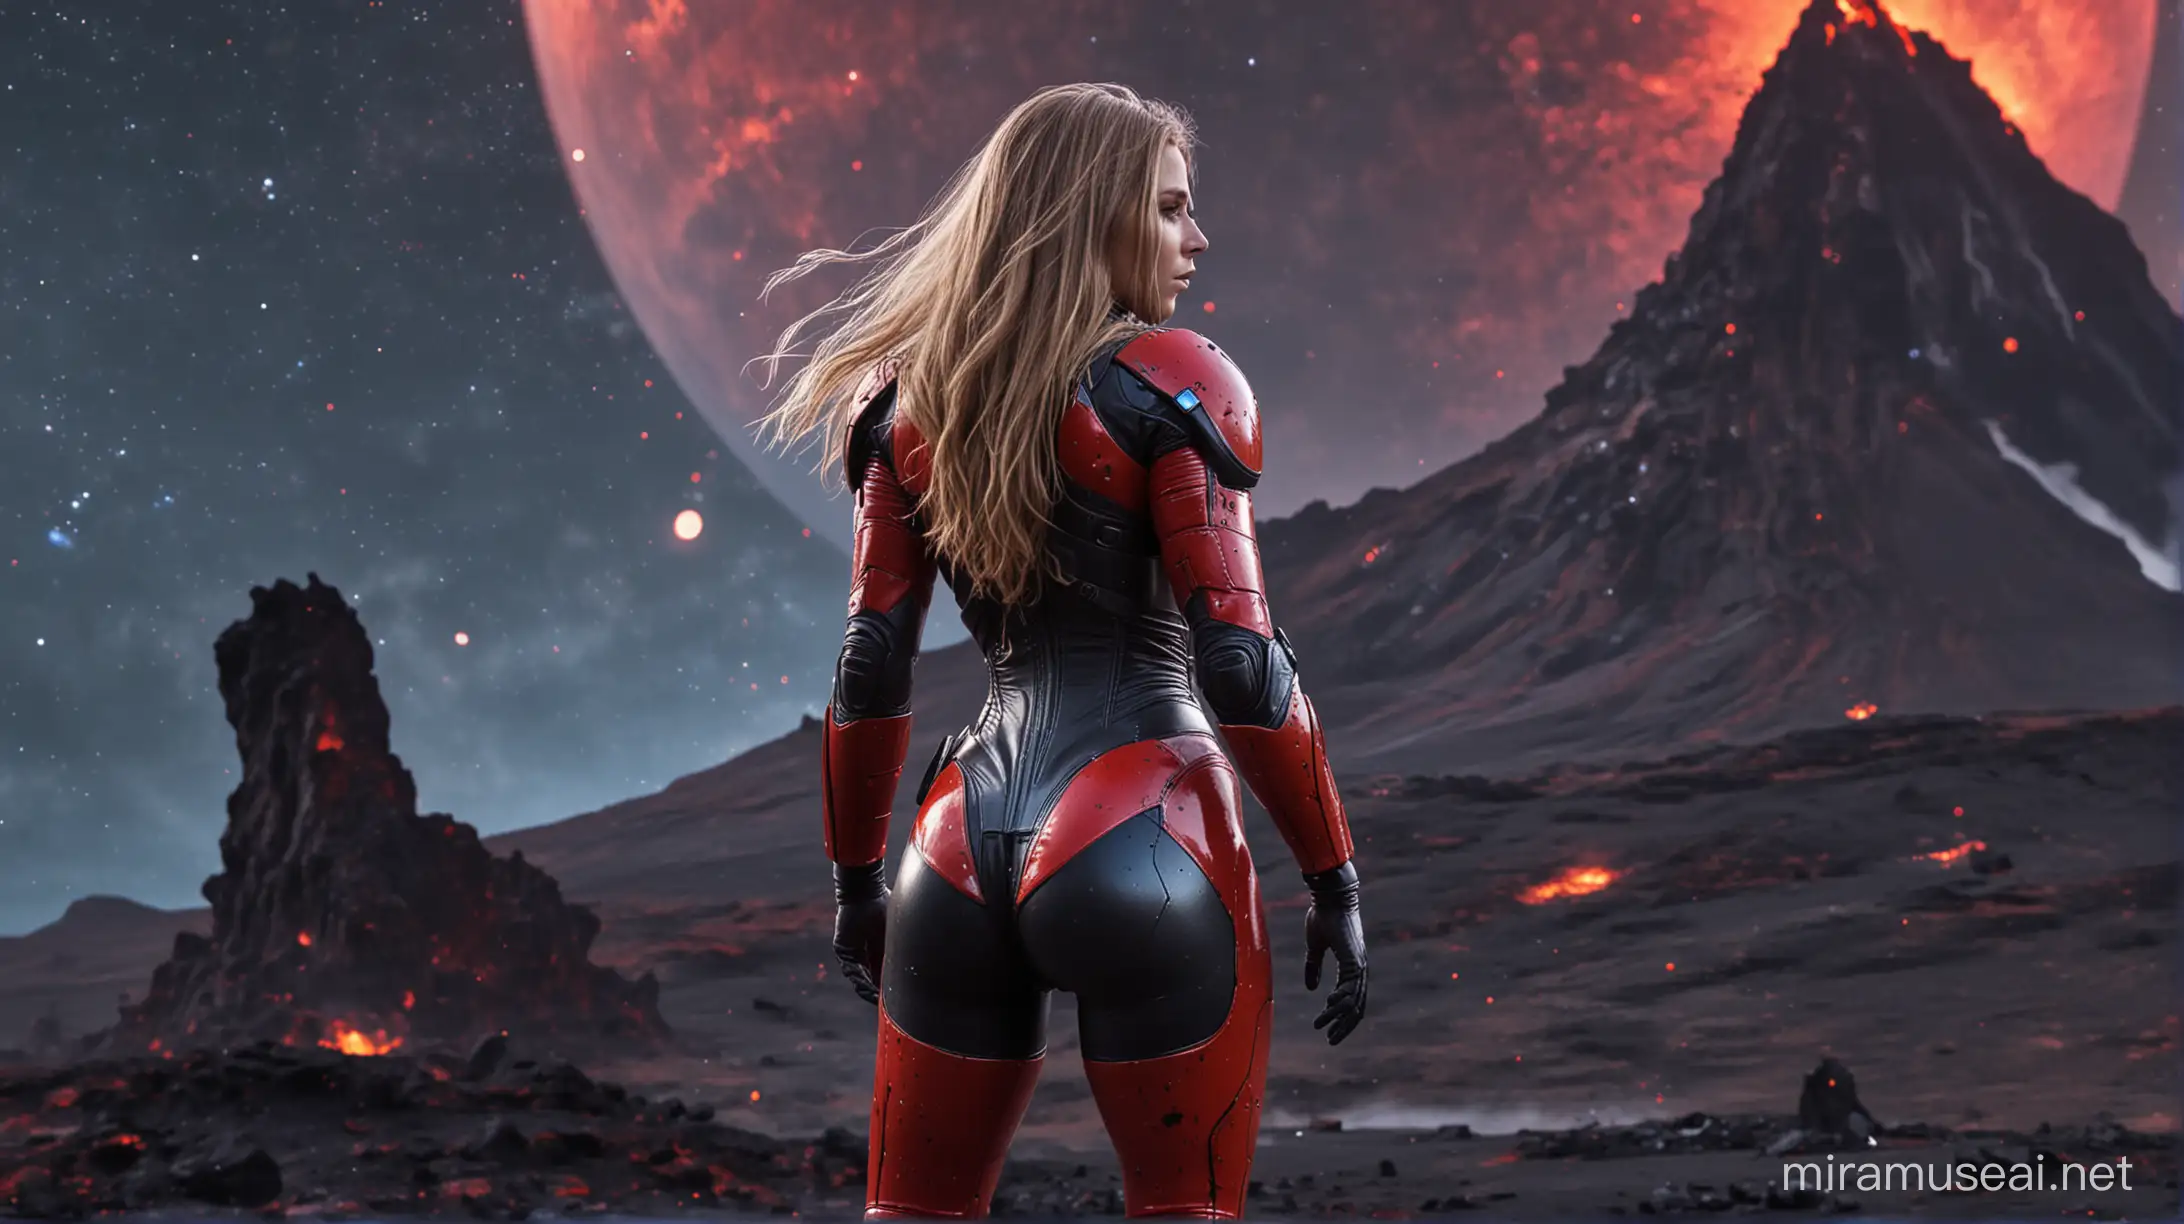 Sensuous Space Nordic Fitness Model Explores Alien Volcano Planet in Black and Blood Red Armored Spacesuit